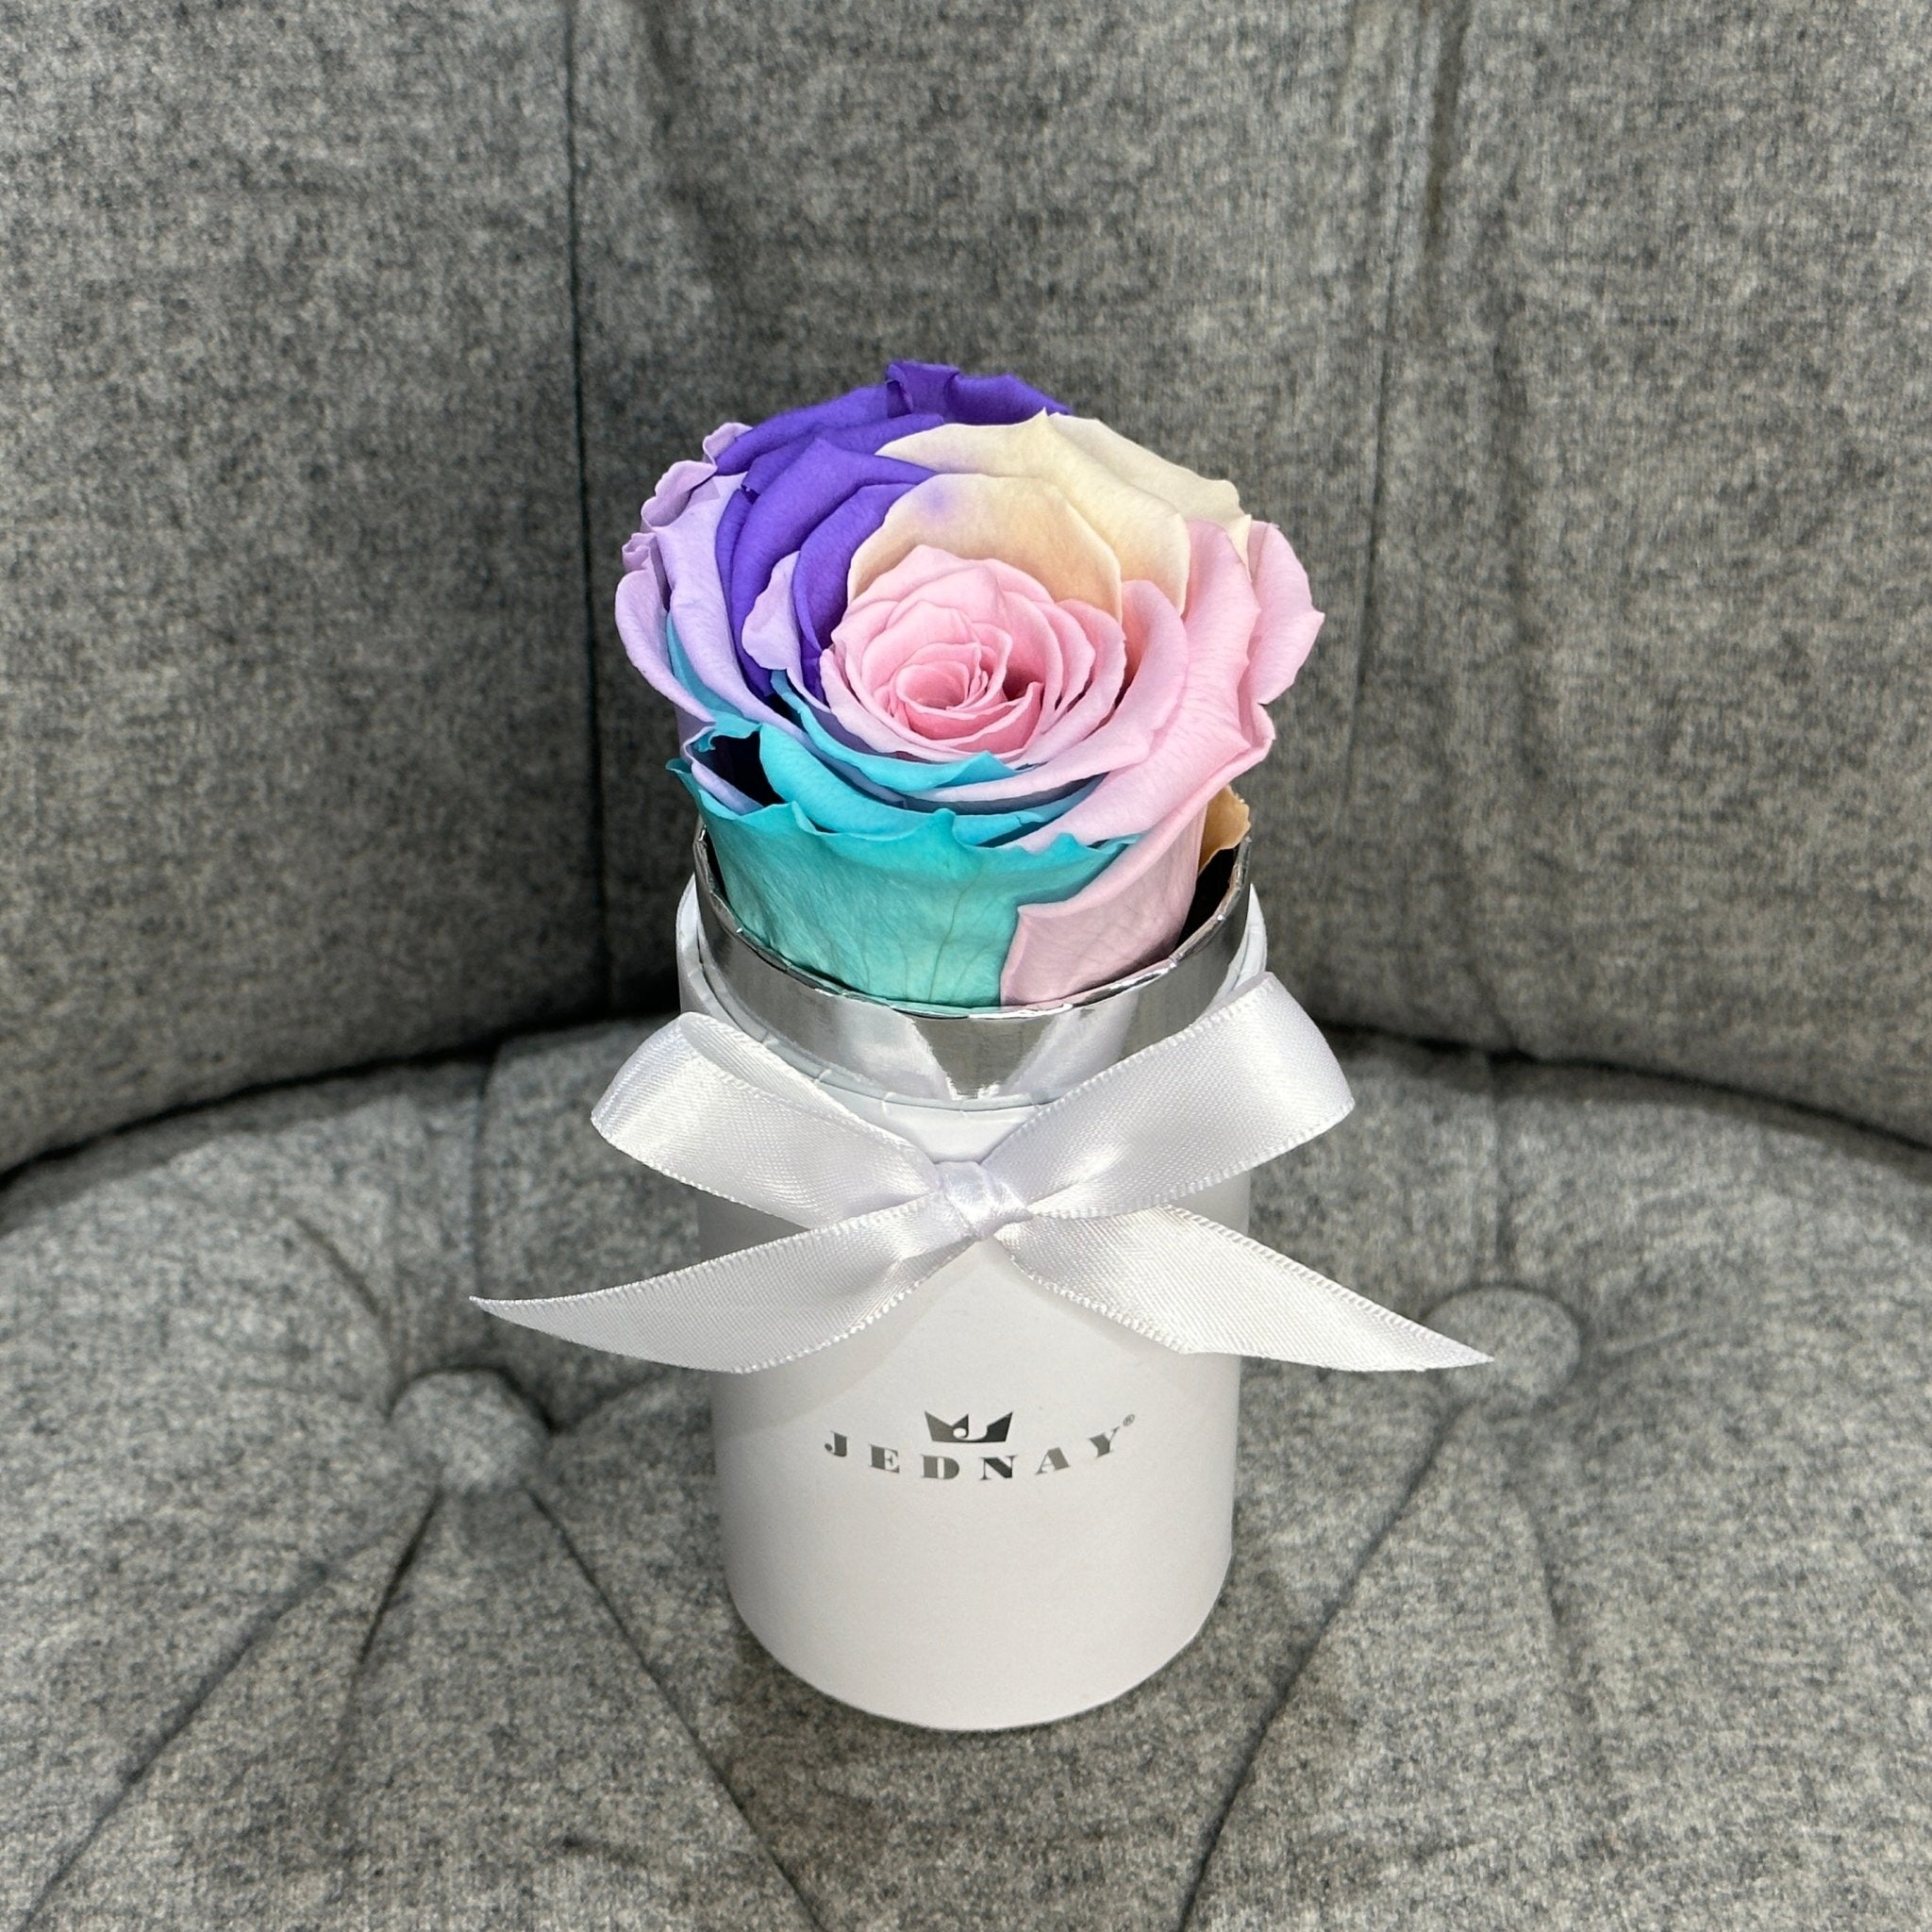 The Uno - Over The Rainbow Eternal Rose - Classic White Box - Jednay Roses